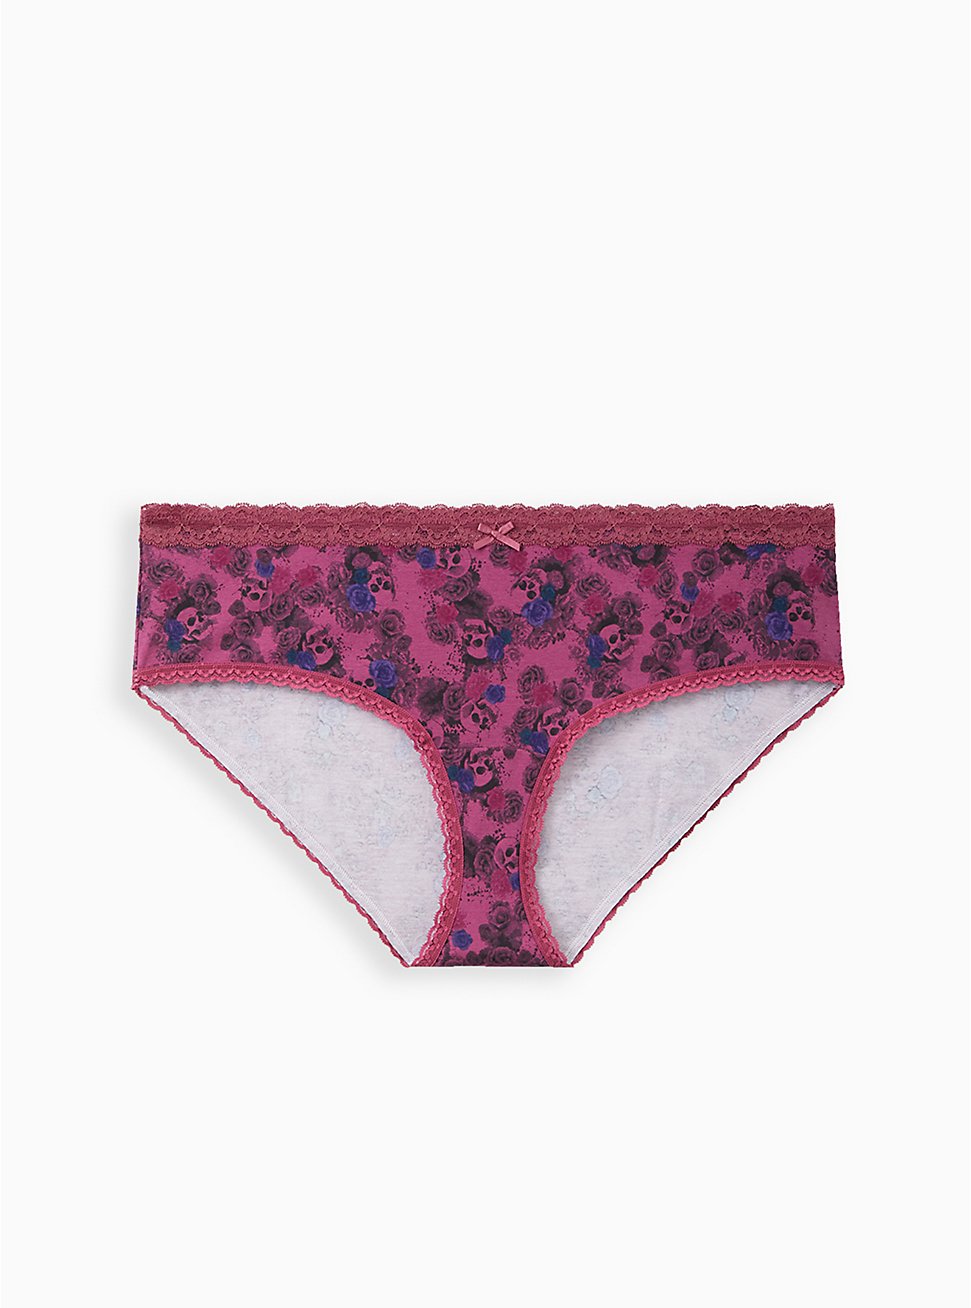 Plus Size Hipster Panty - Cotton Skull & Roses, MULTI FORAL, hi-res